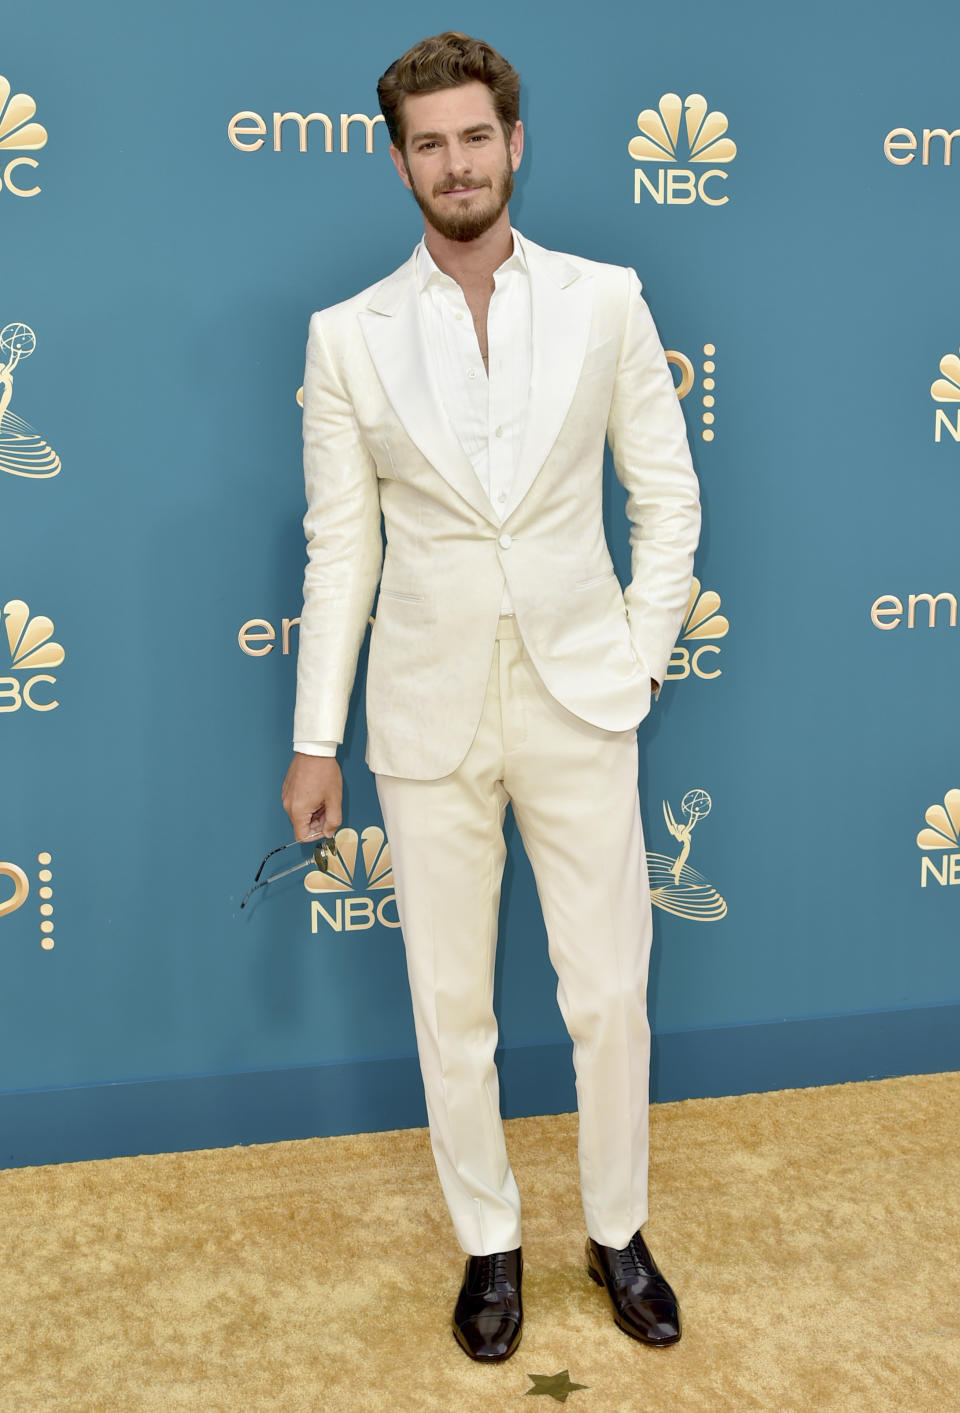 Andrew Garfield arrives at the 74th Primetime Emmy Awards on Monday, Sept. 12, 2022, at the Microsoft Theater in Los Angeles. (Photo by Richard Shotwell/Invision/AP)